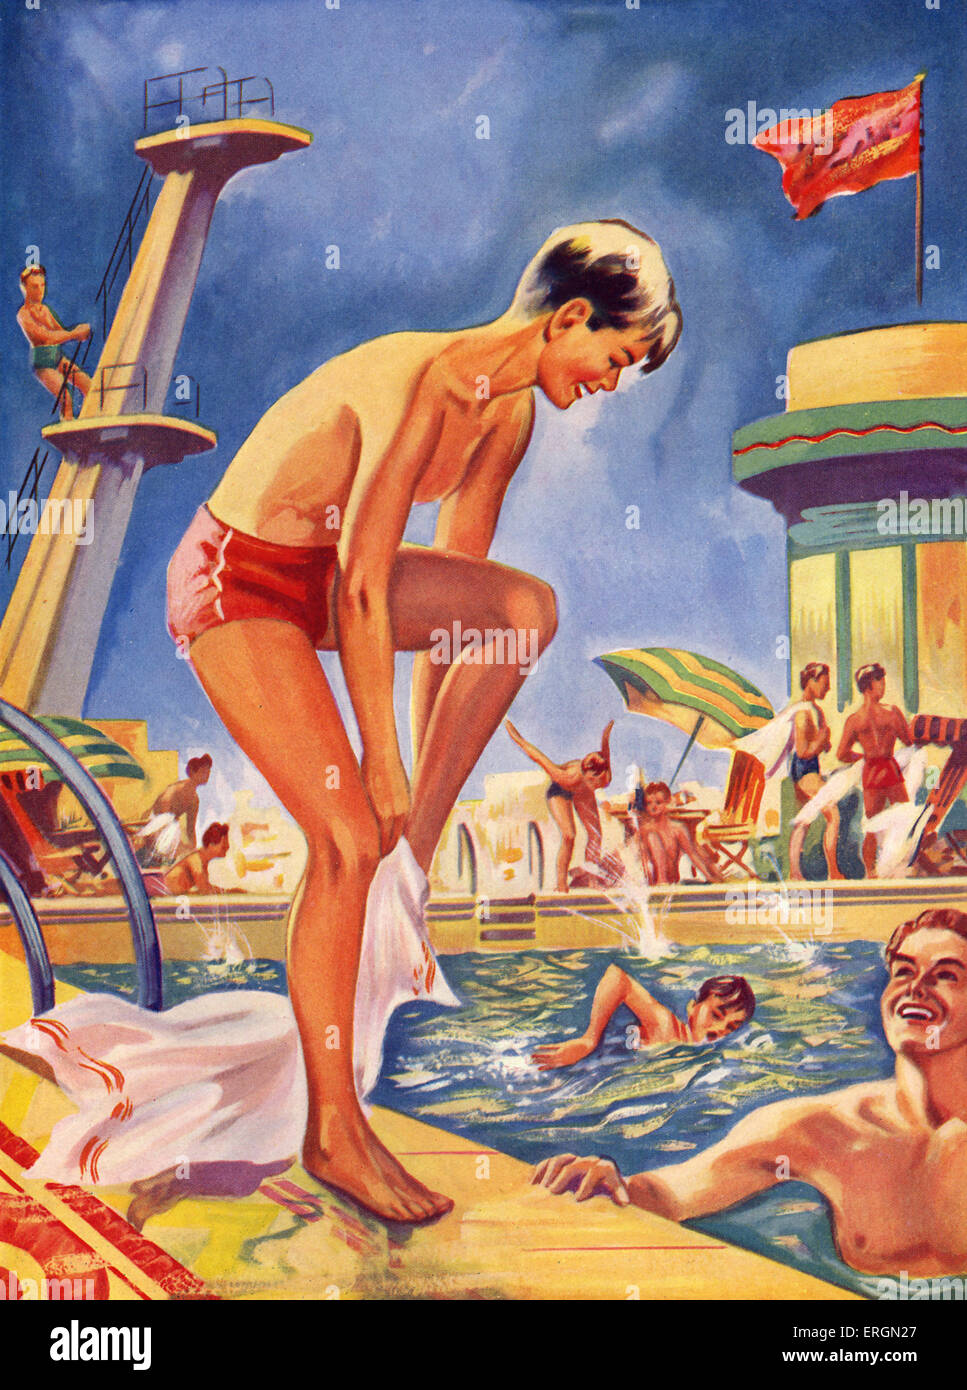 Lido swimming pool 1930s Illsutration from late 1930s, artist not known, from Wonder Book series Stock Photo